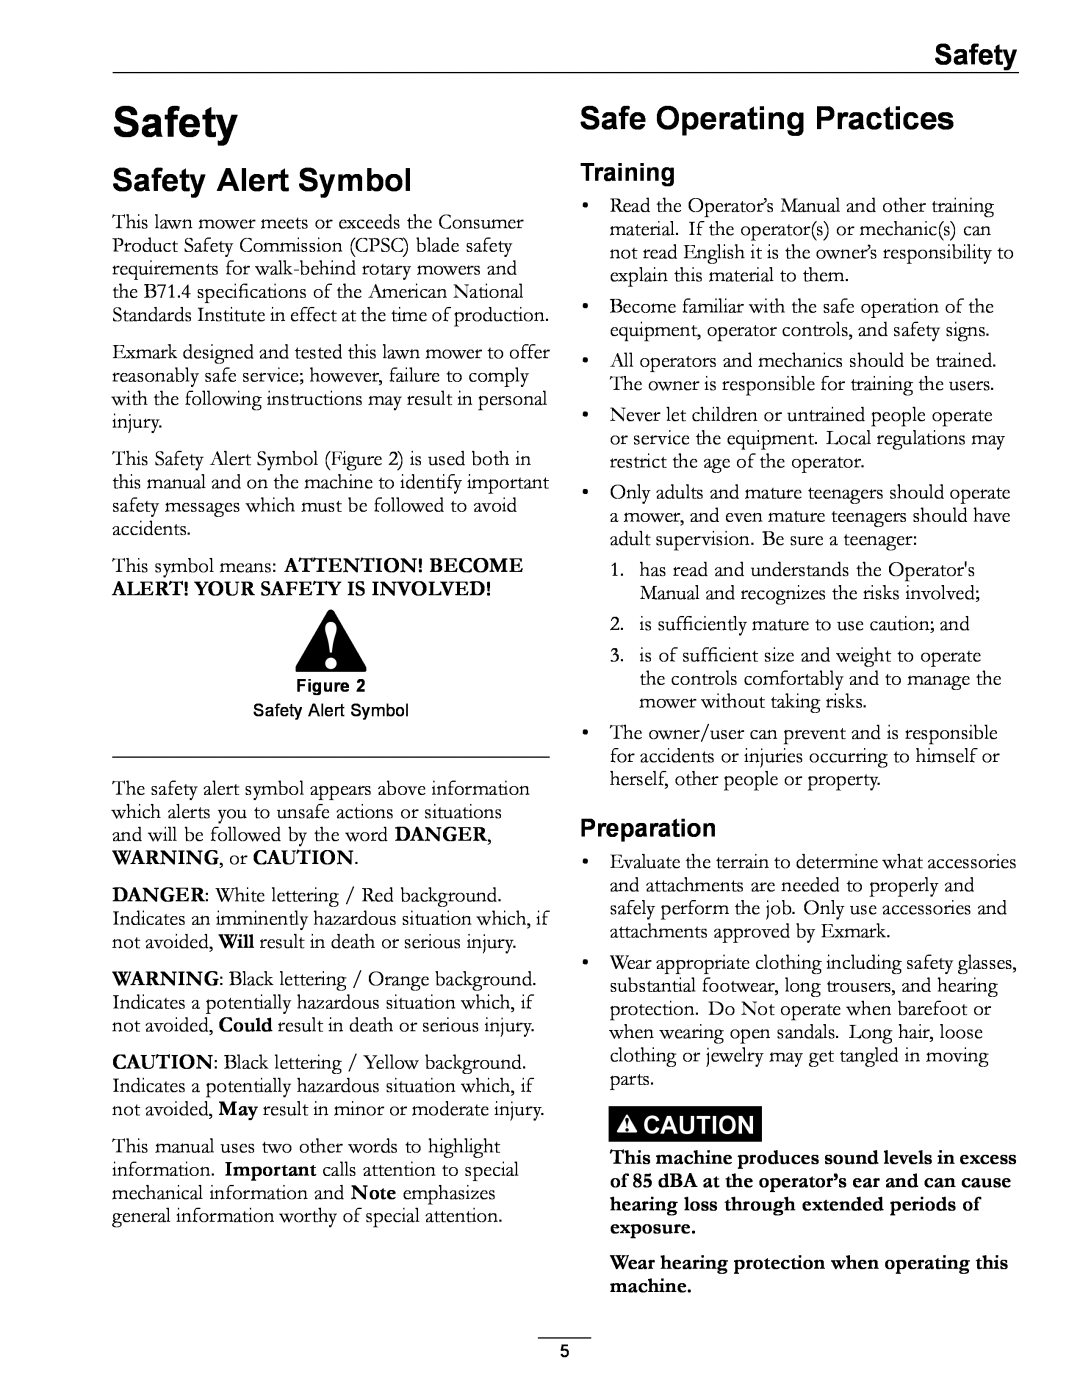 Exmark COMMERCIAL 21 manual Safety Alert Symbol, Safe Operating Practices, Training, Preparation 